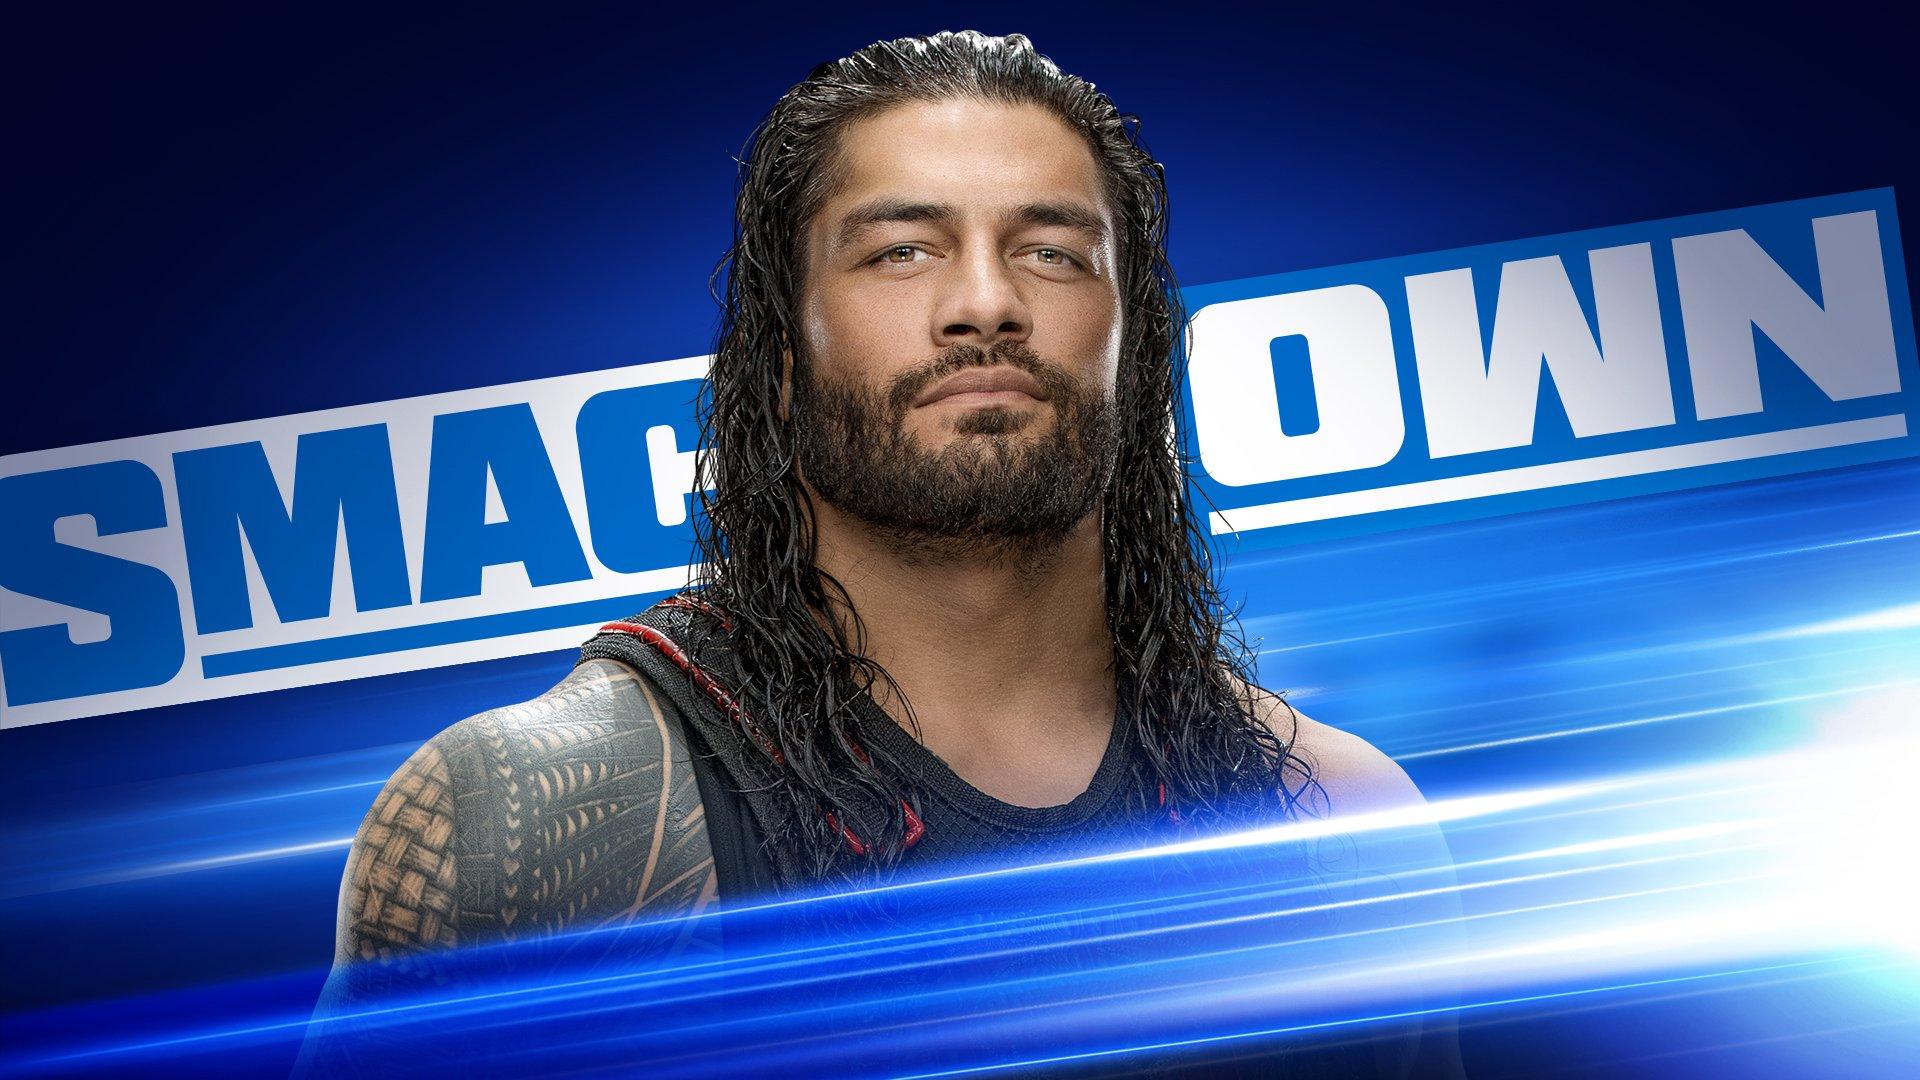 Roman Reigns’ Segment Confirmed For WWE SmackDown This Week